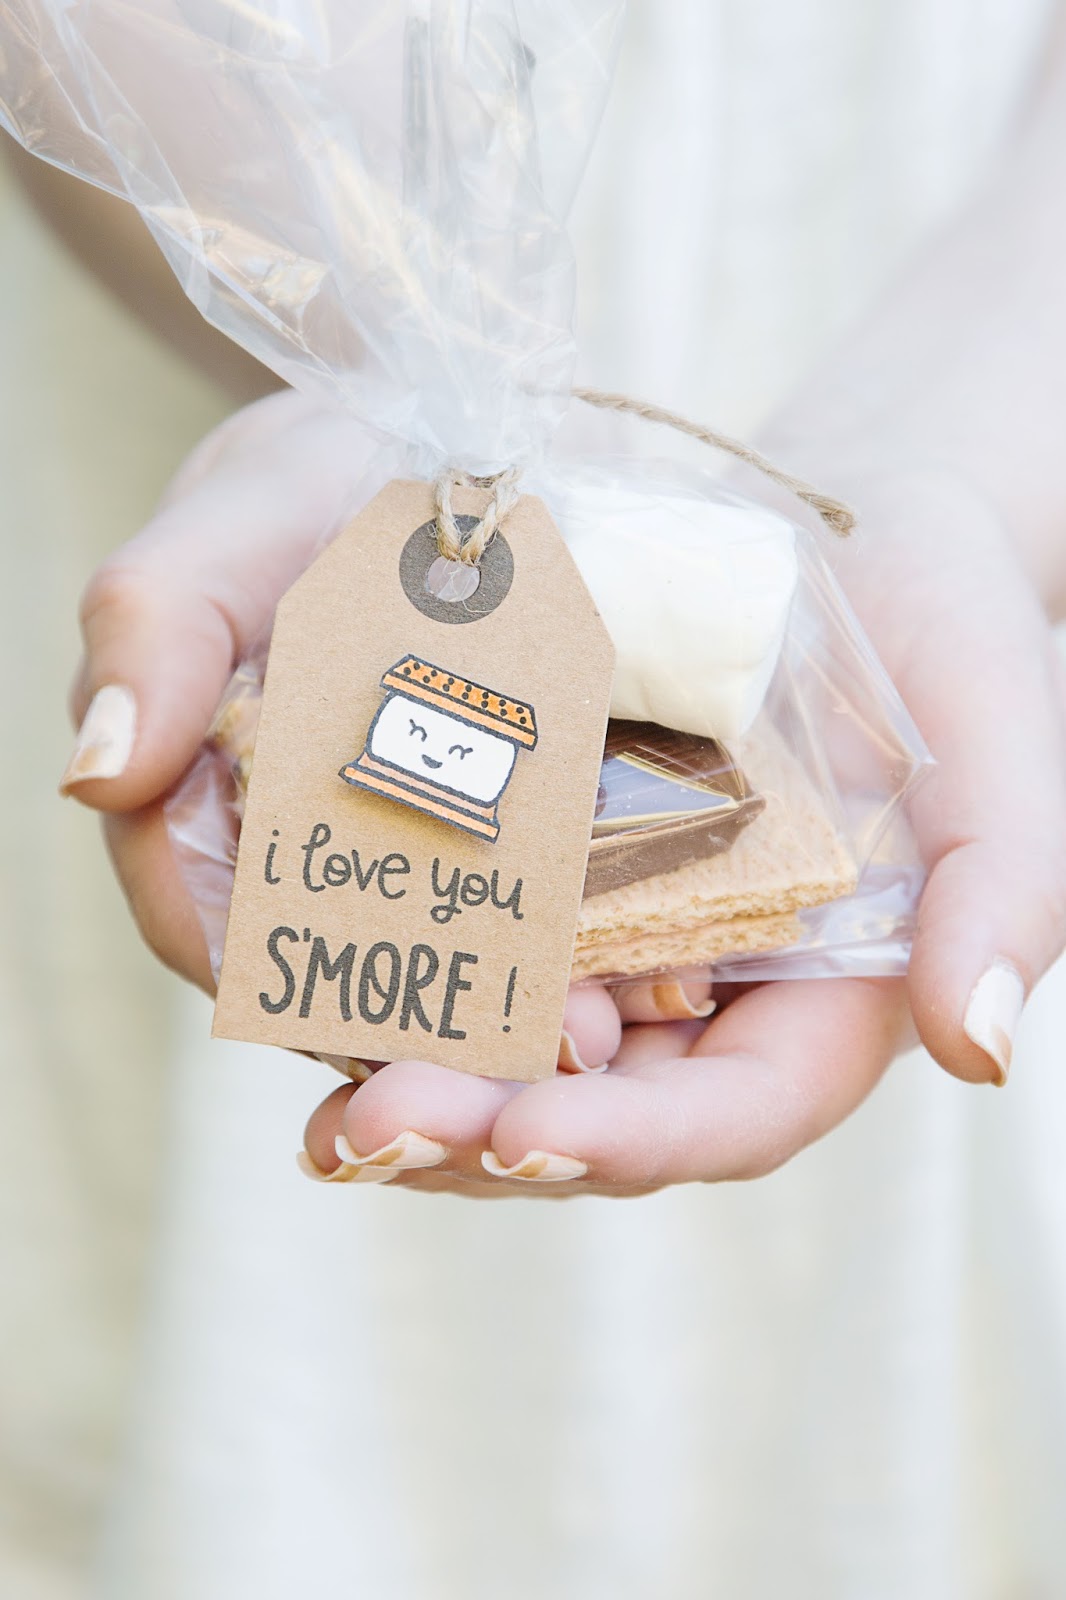 Lawn Fawn Smore Favors @craftsavvy @createoften #diy #party #favors #smores #glamping